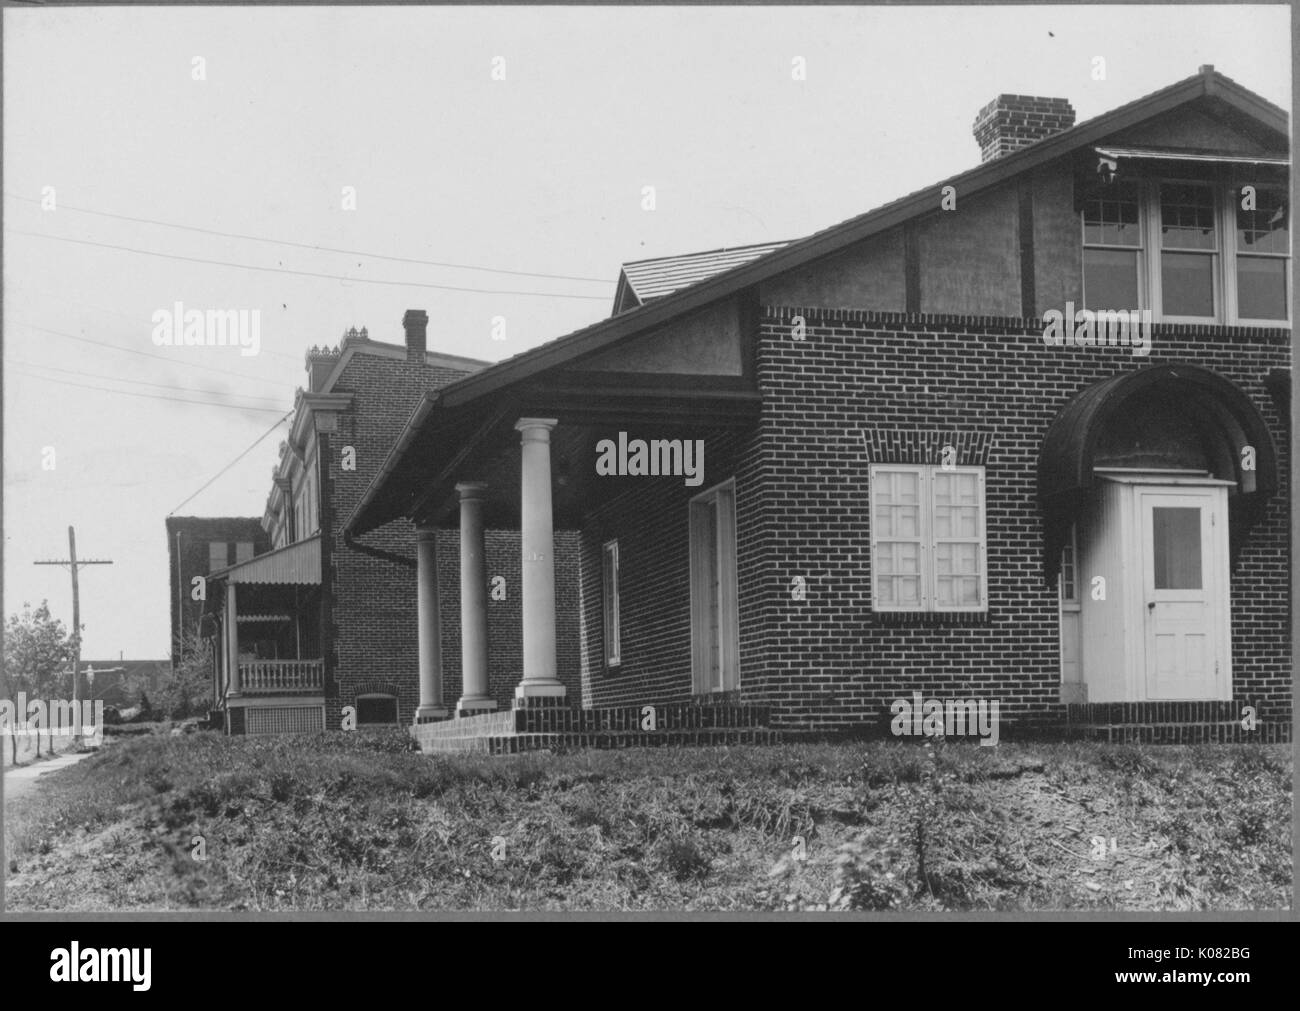 Side view of brick homes on quiet street surrounded by vegetation, House in front has front porch and side door and columns, telephone poles, wires and trees around house, Baltimore, Maryland, 1910. This image is from a series documenting the construction and sale of homes in the Roland Park/Guilford neighborhood of Baltimore, a streetcar suburb and one of the first planned communities in the United States. Stock Photo